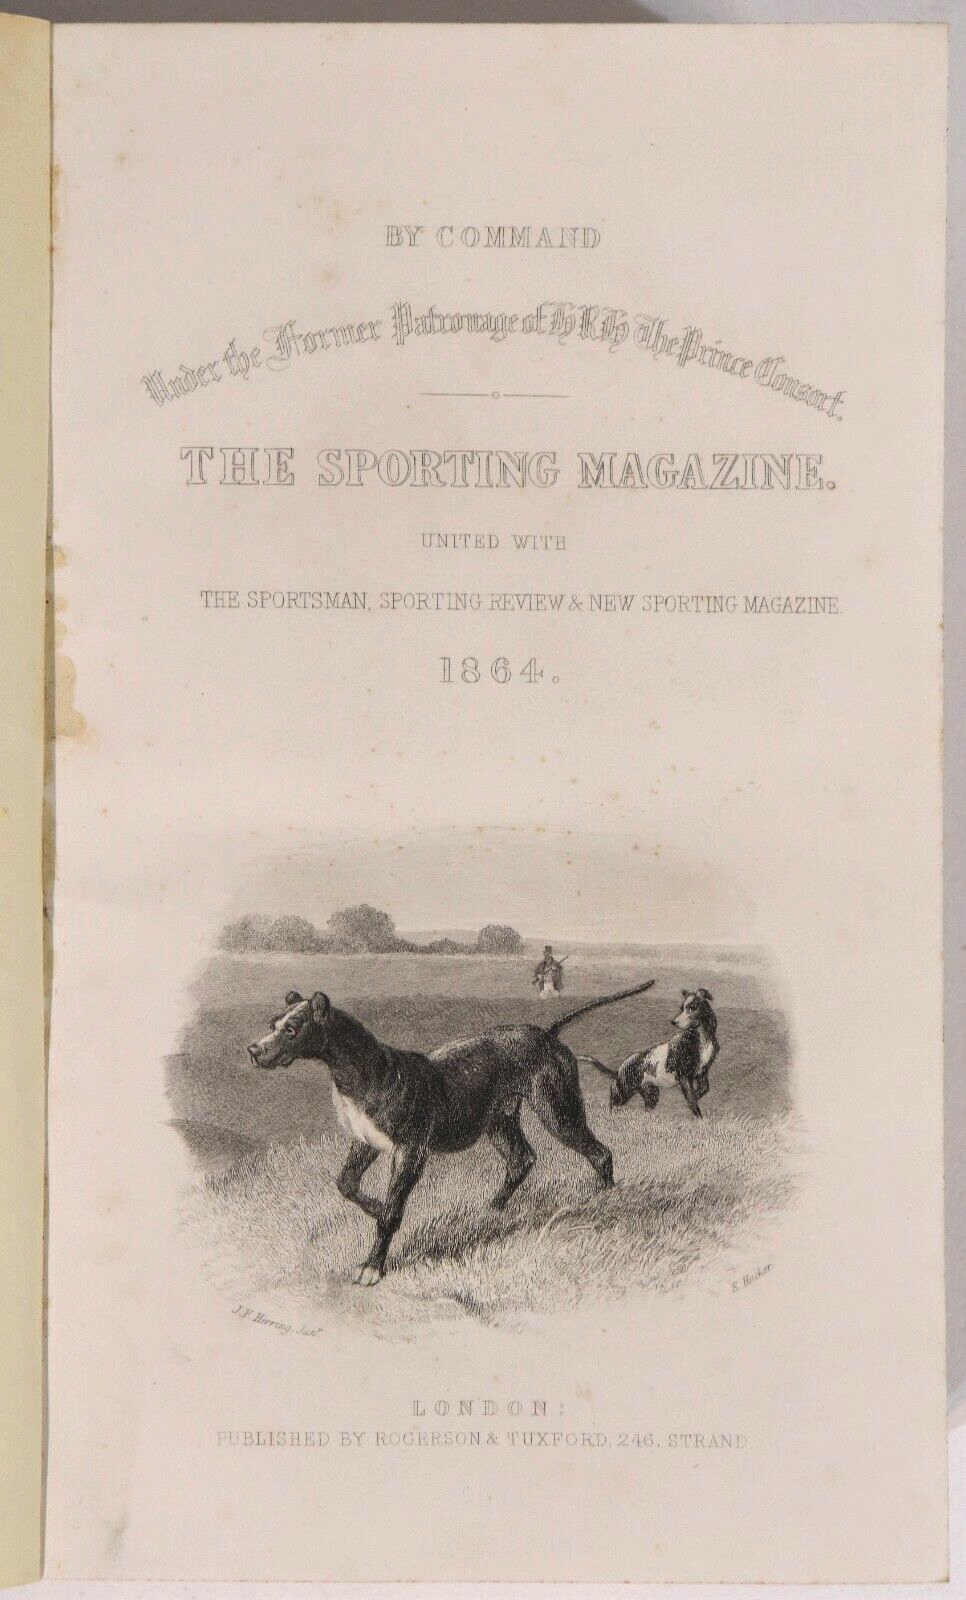 The Sporting Magazine & Sporting Review - 1864 - Antiquarian Sport History Book - 0